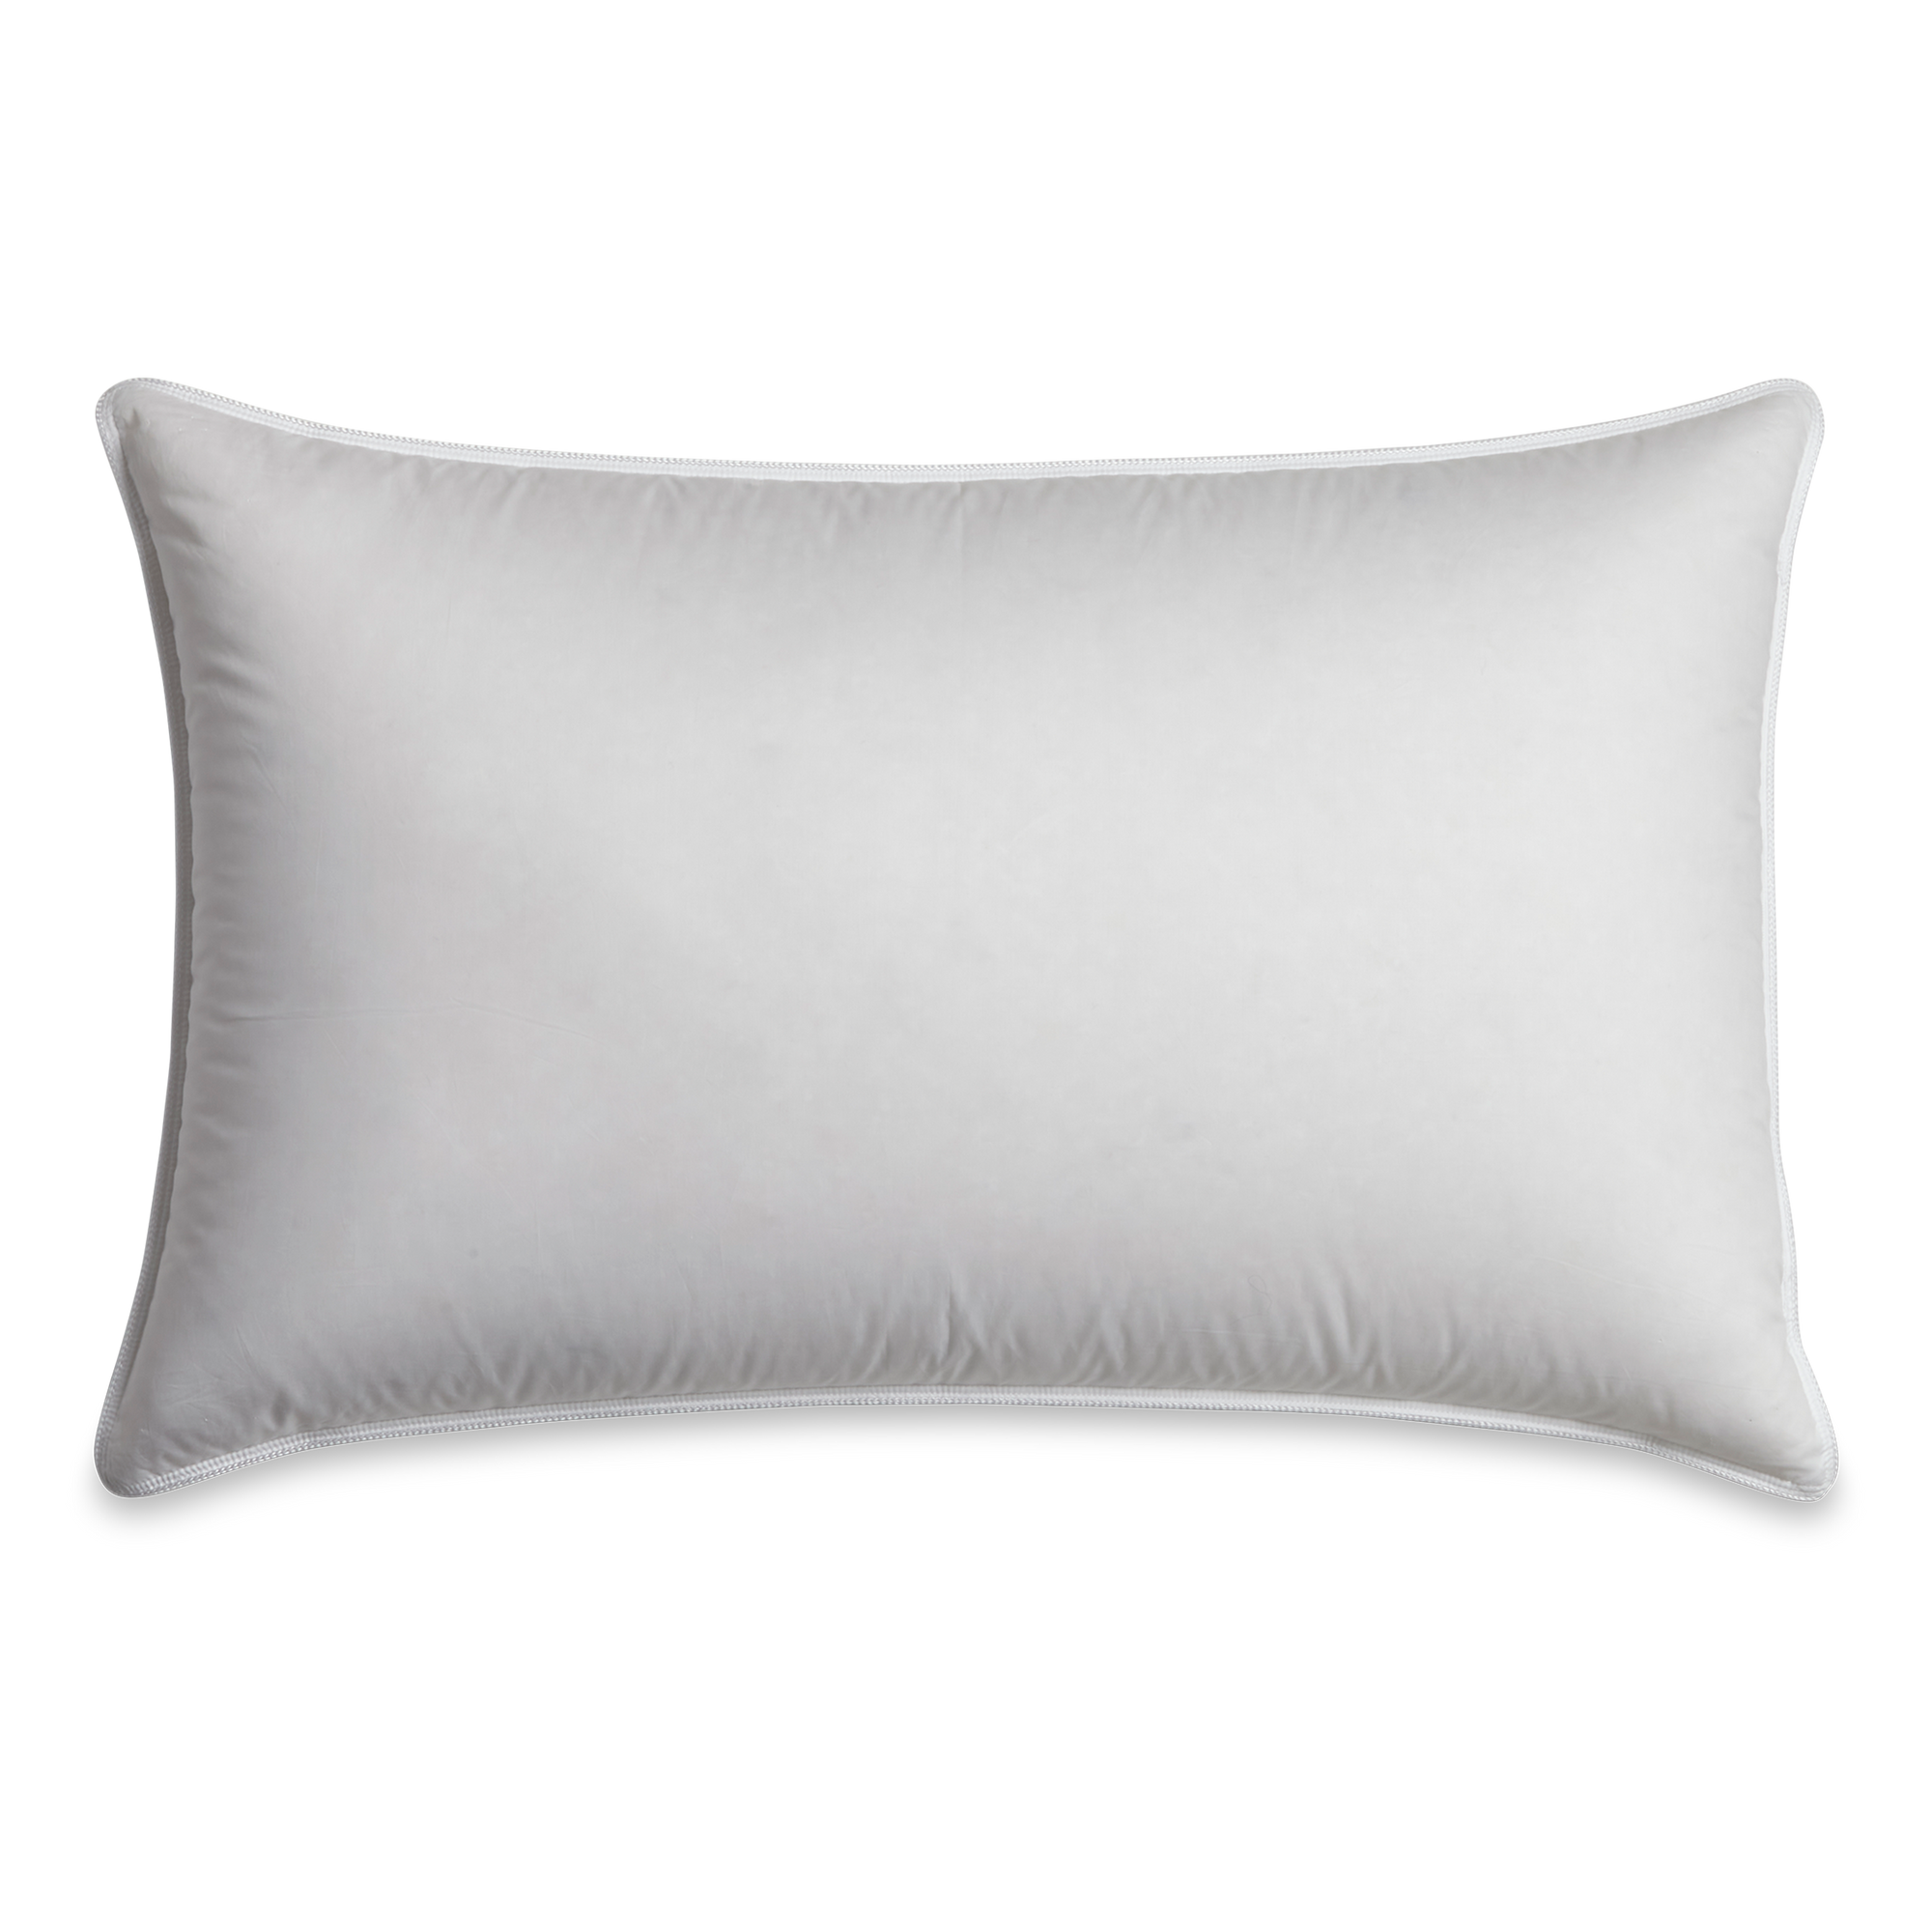 This premium pillow is made with white goose down - known to be the finest and softest in the world, and features the luxurious comfort of 850 Fill Power.